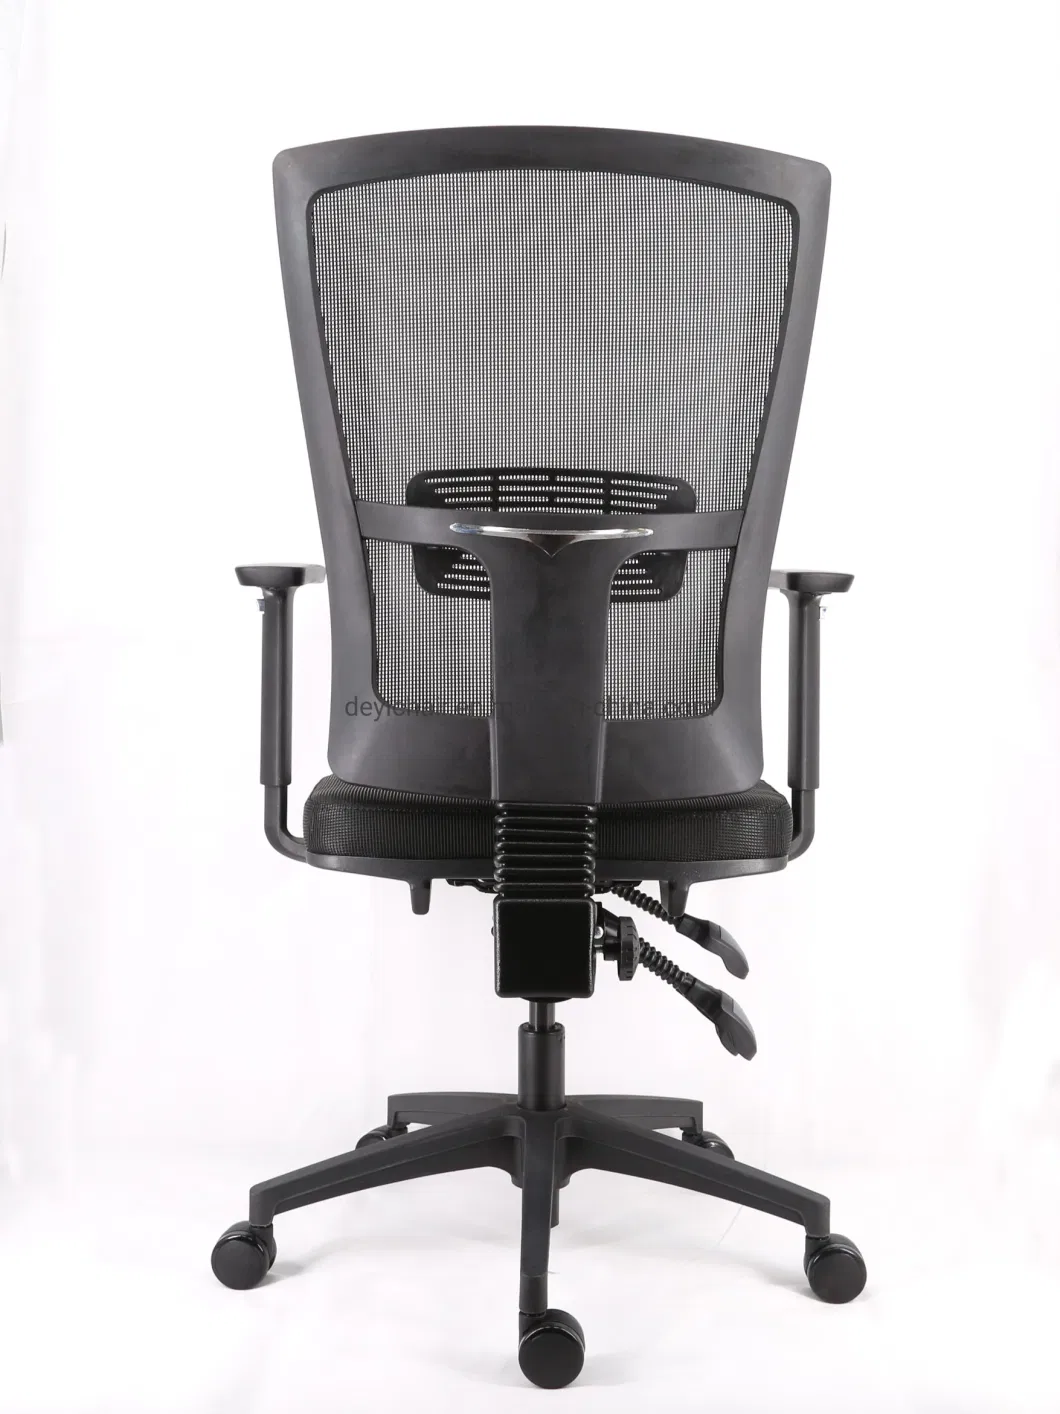 3 Lever Heavy Duty Mechanism BIFMA Standard Nylon Base and PU Castor with Adjustable Arms and Lumbar Support Office Chair